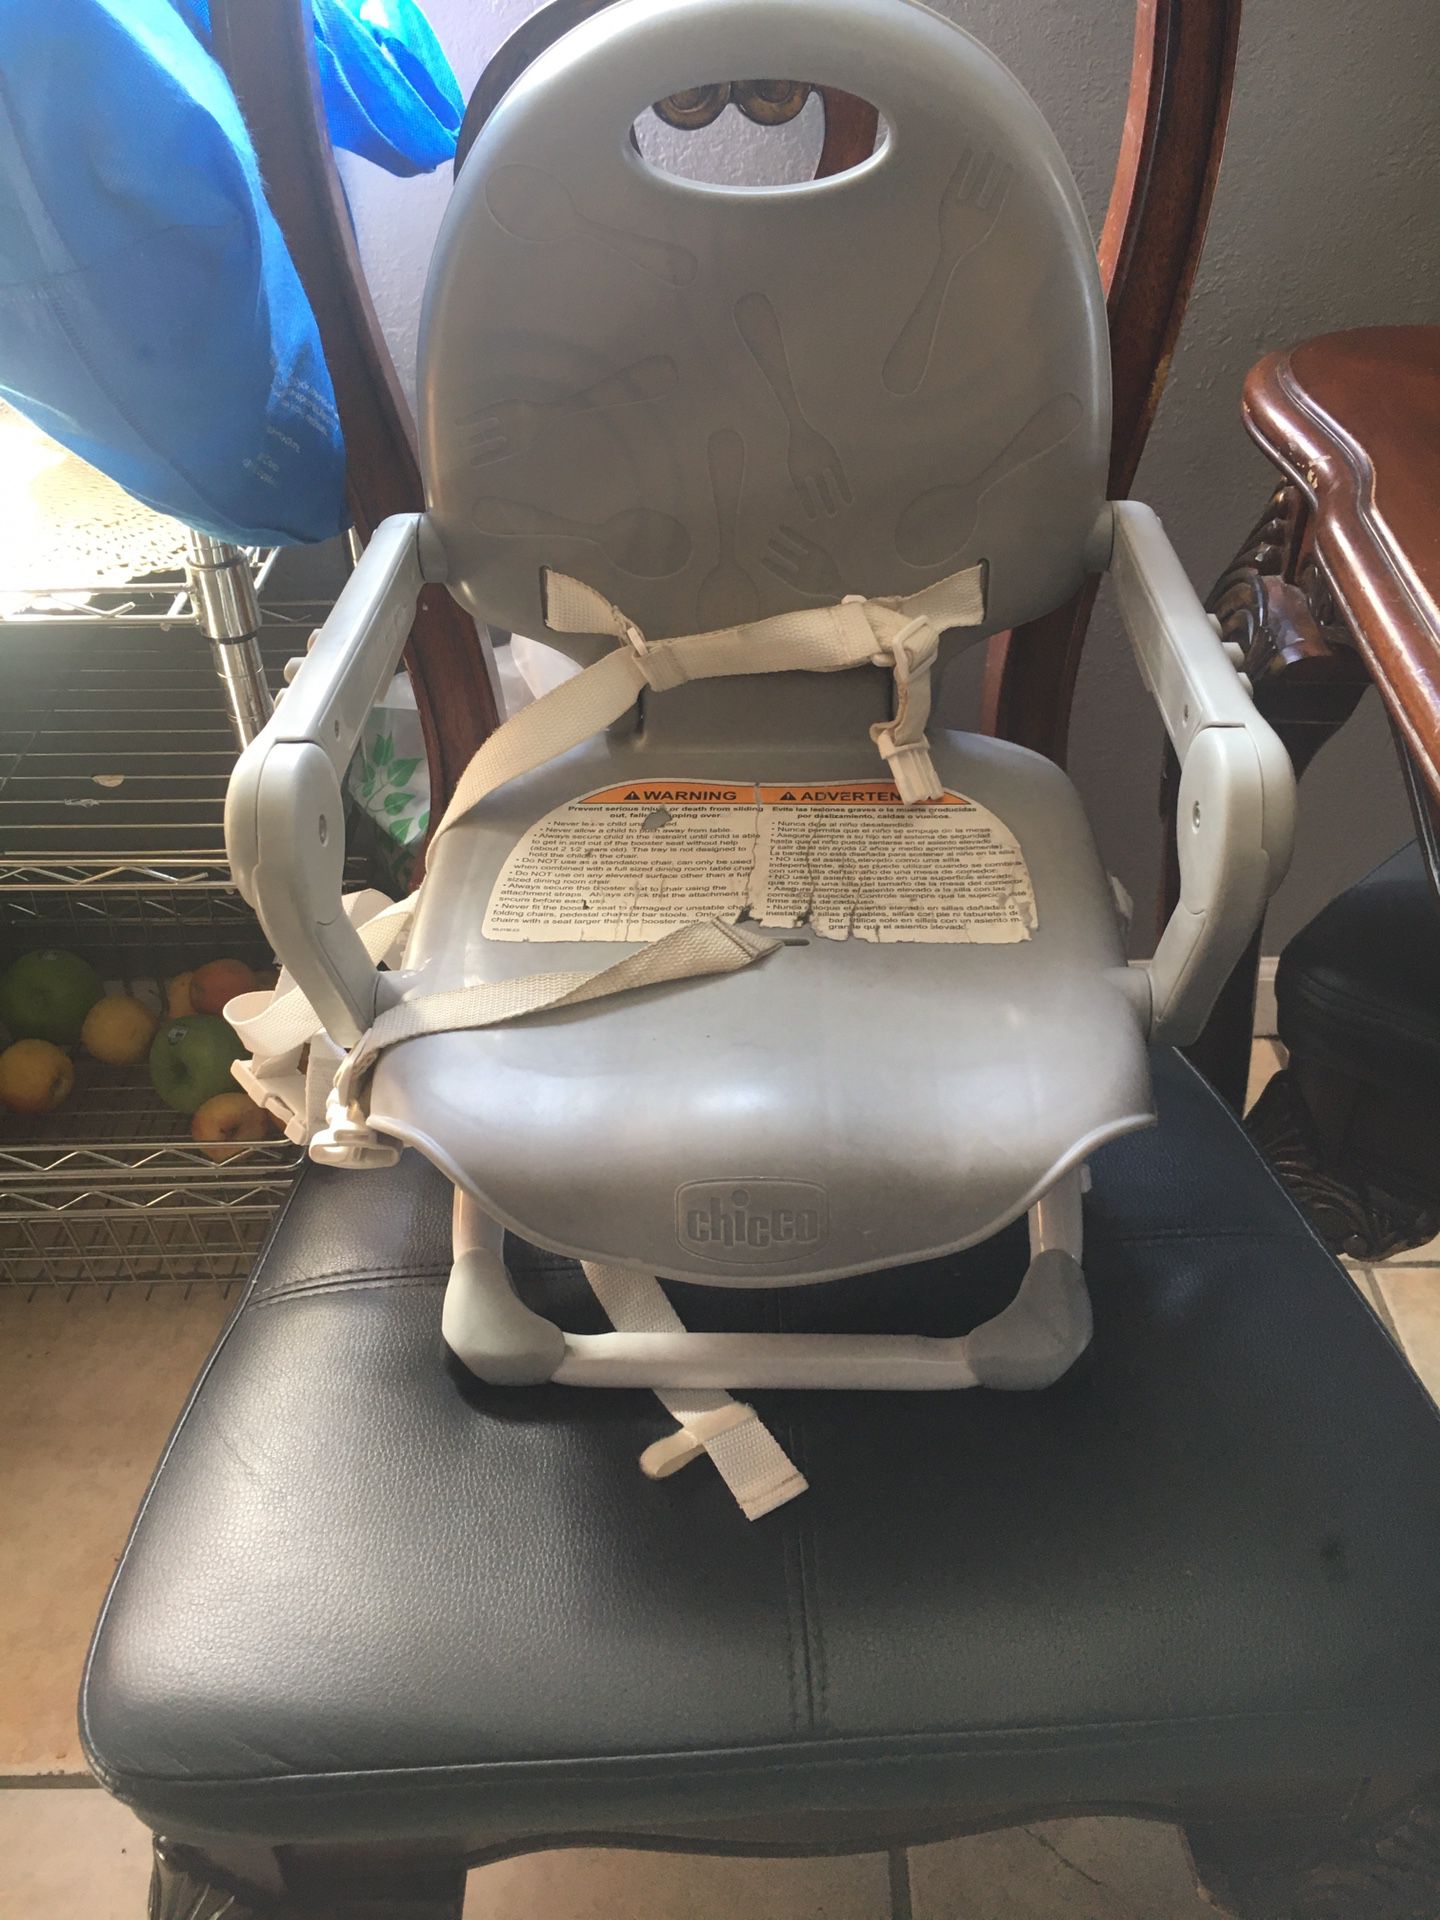 Free chicco high chair